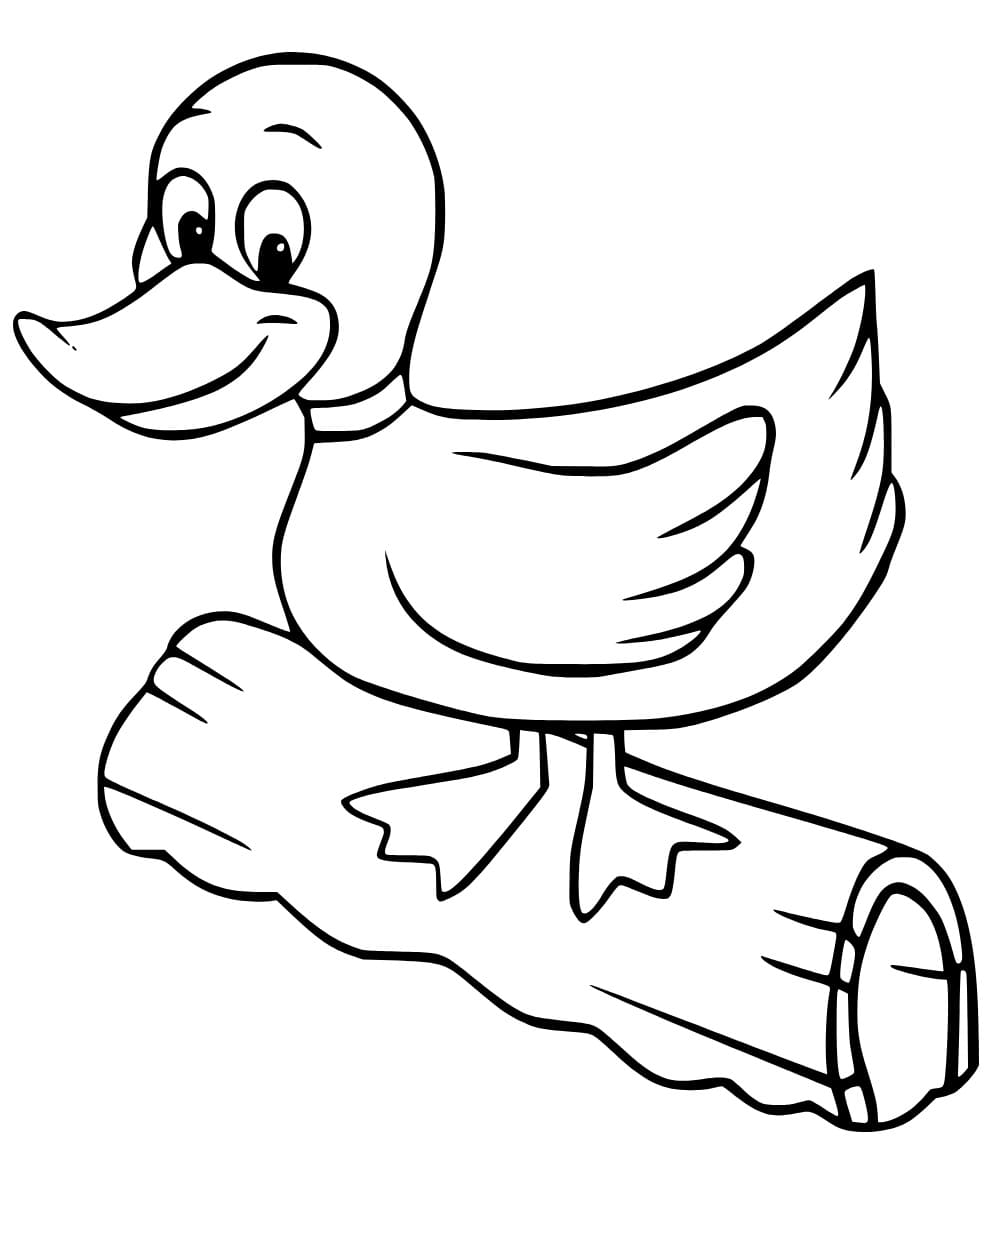 A Cute Rubber Duck coloring page - Download, Print or Color Online for Free